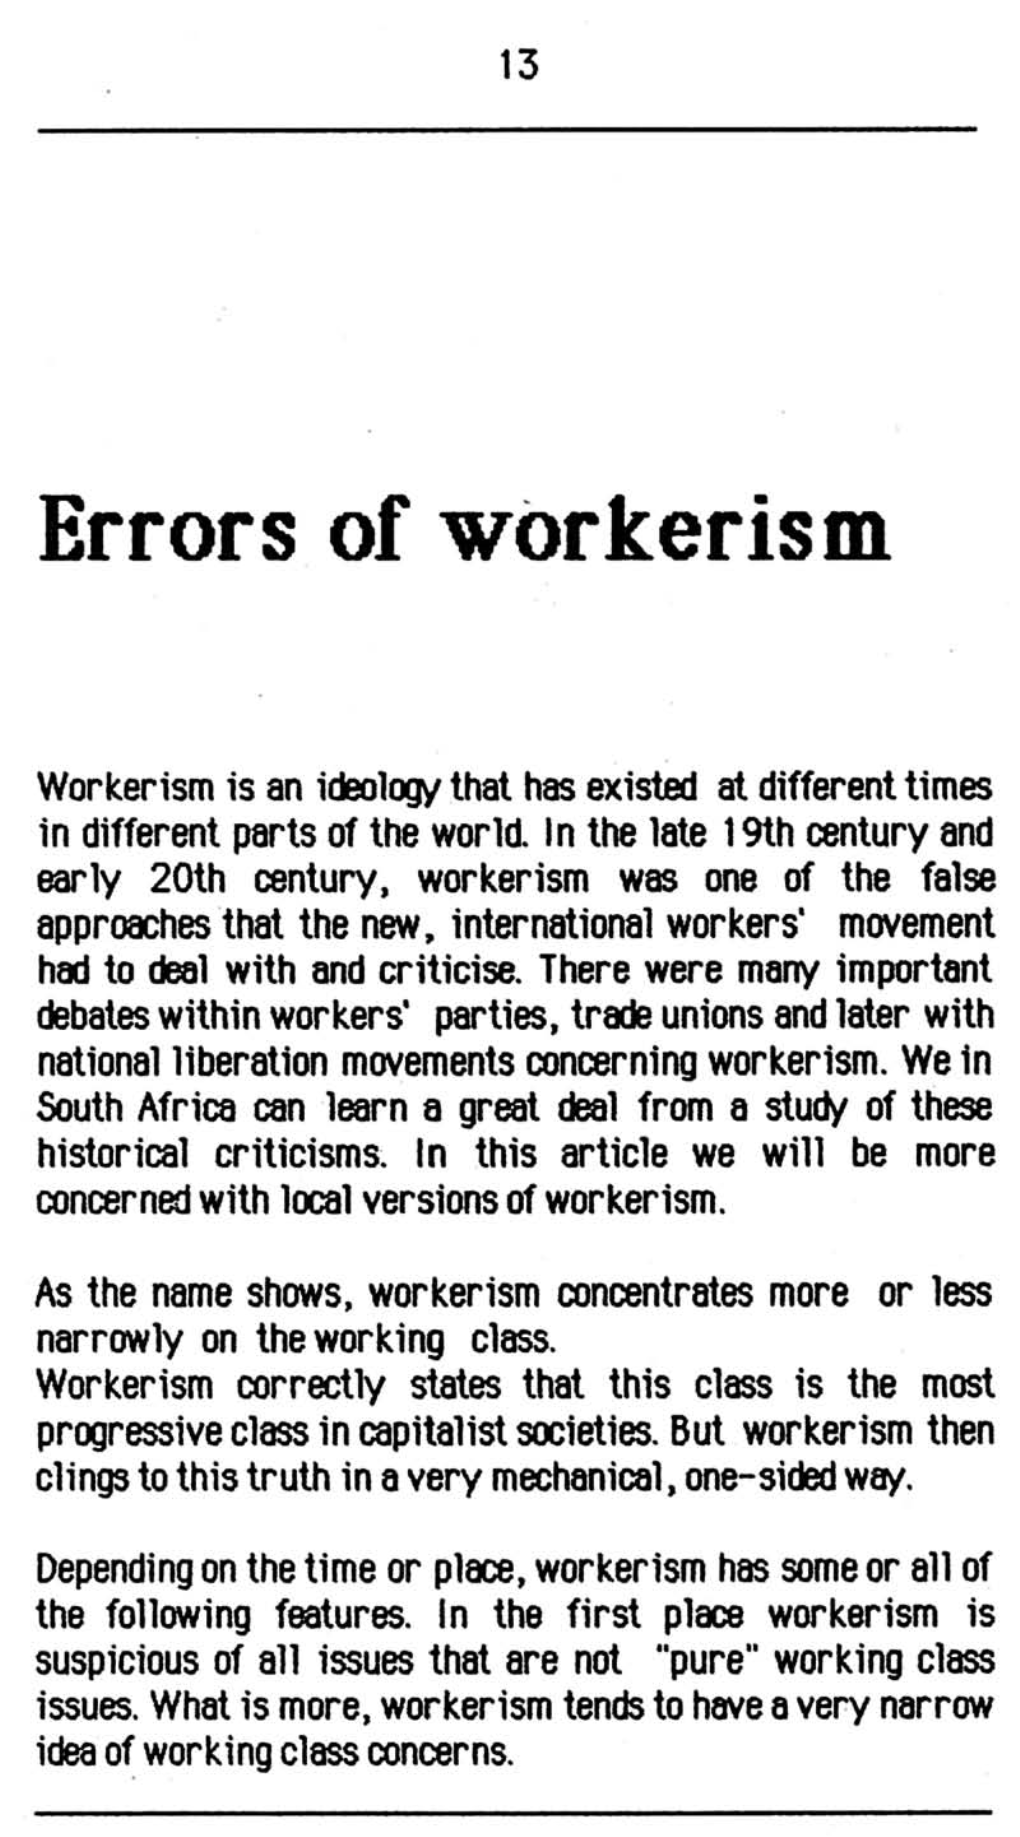 Workerism Is an Ideology That Has Existed at Different Times in Different Parts of the World